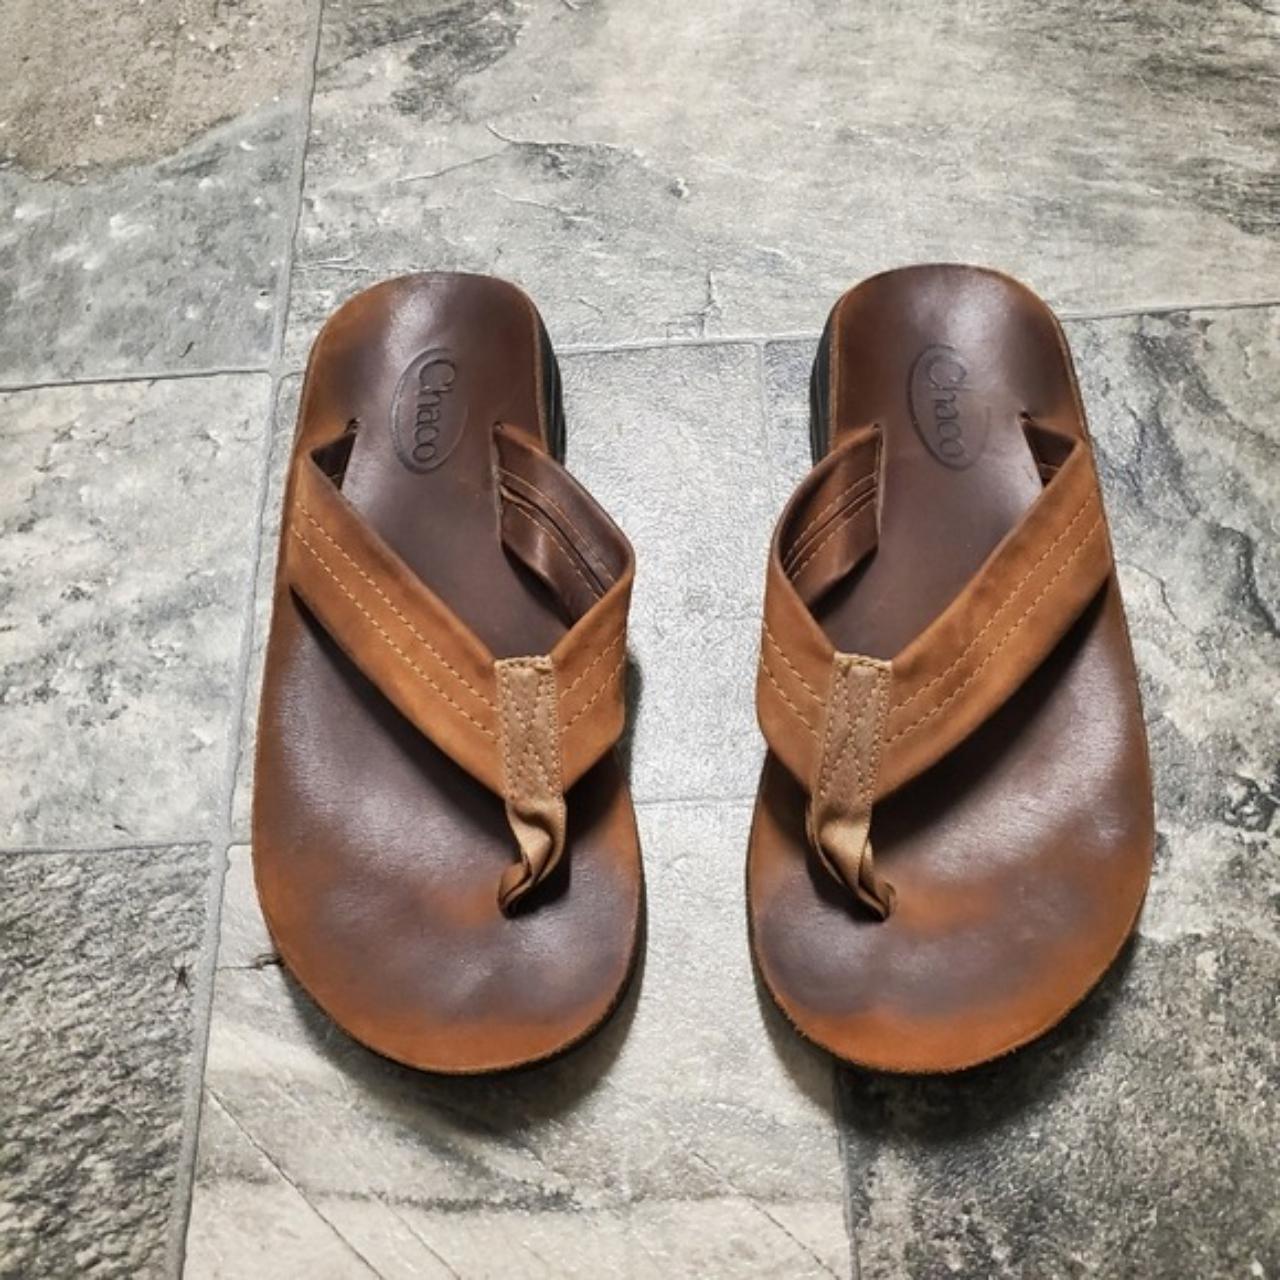 Chaco Mens Size 11 M Tan Bronzer Classic Leather Flip Flops